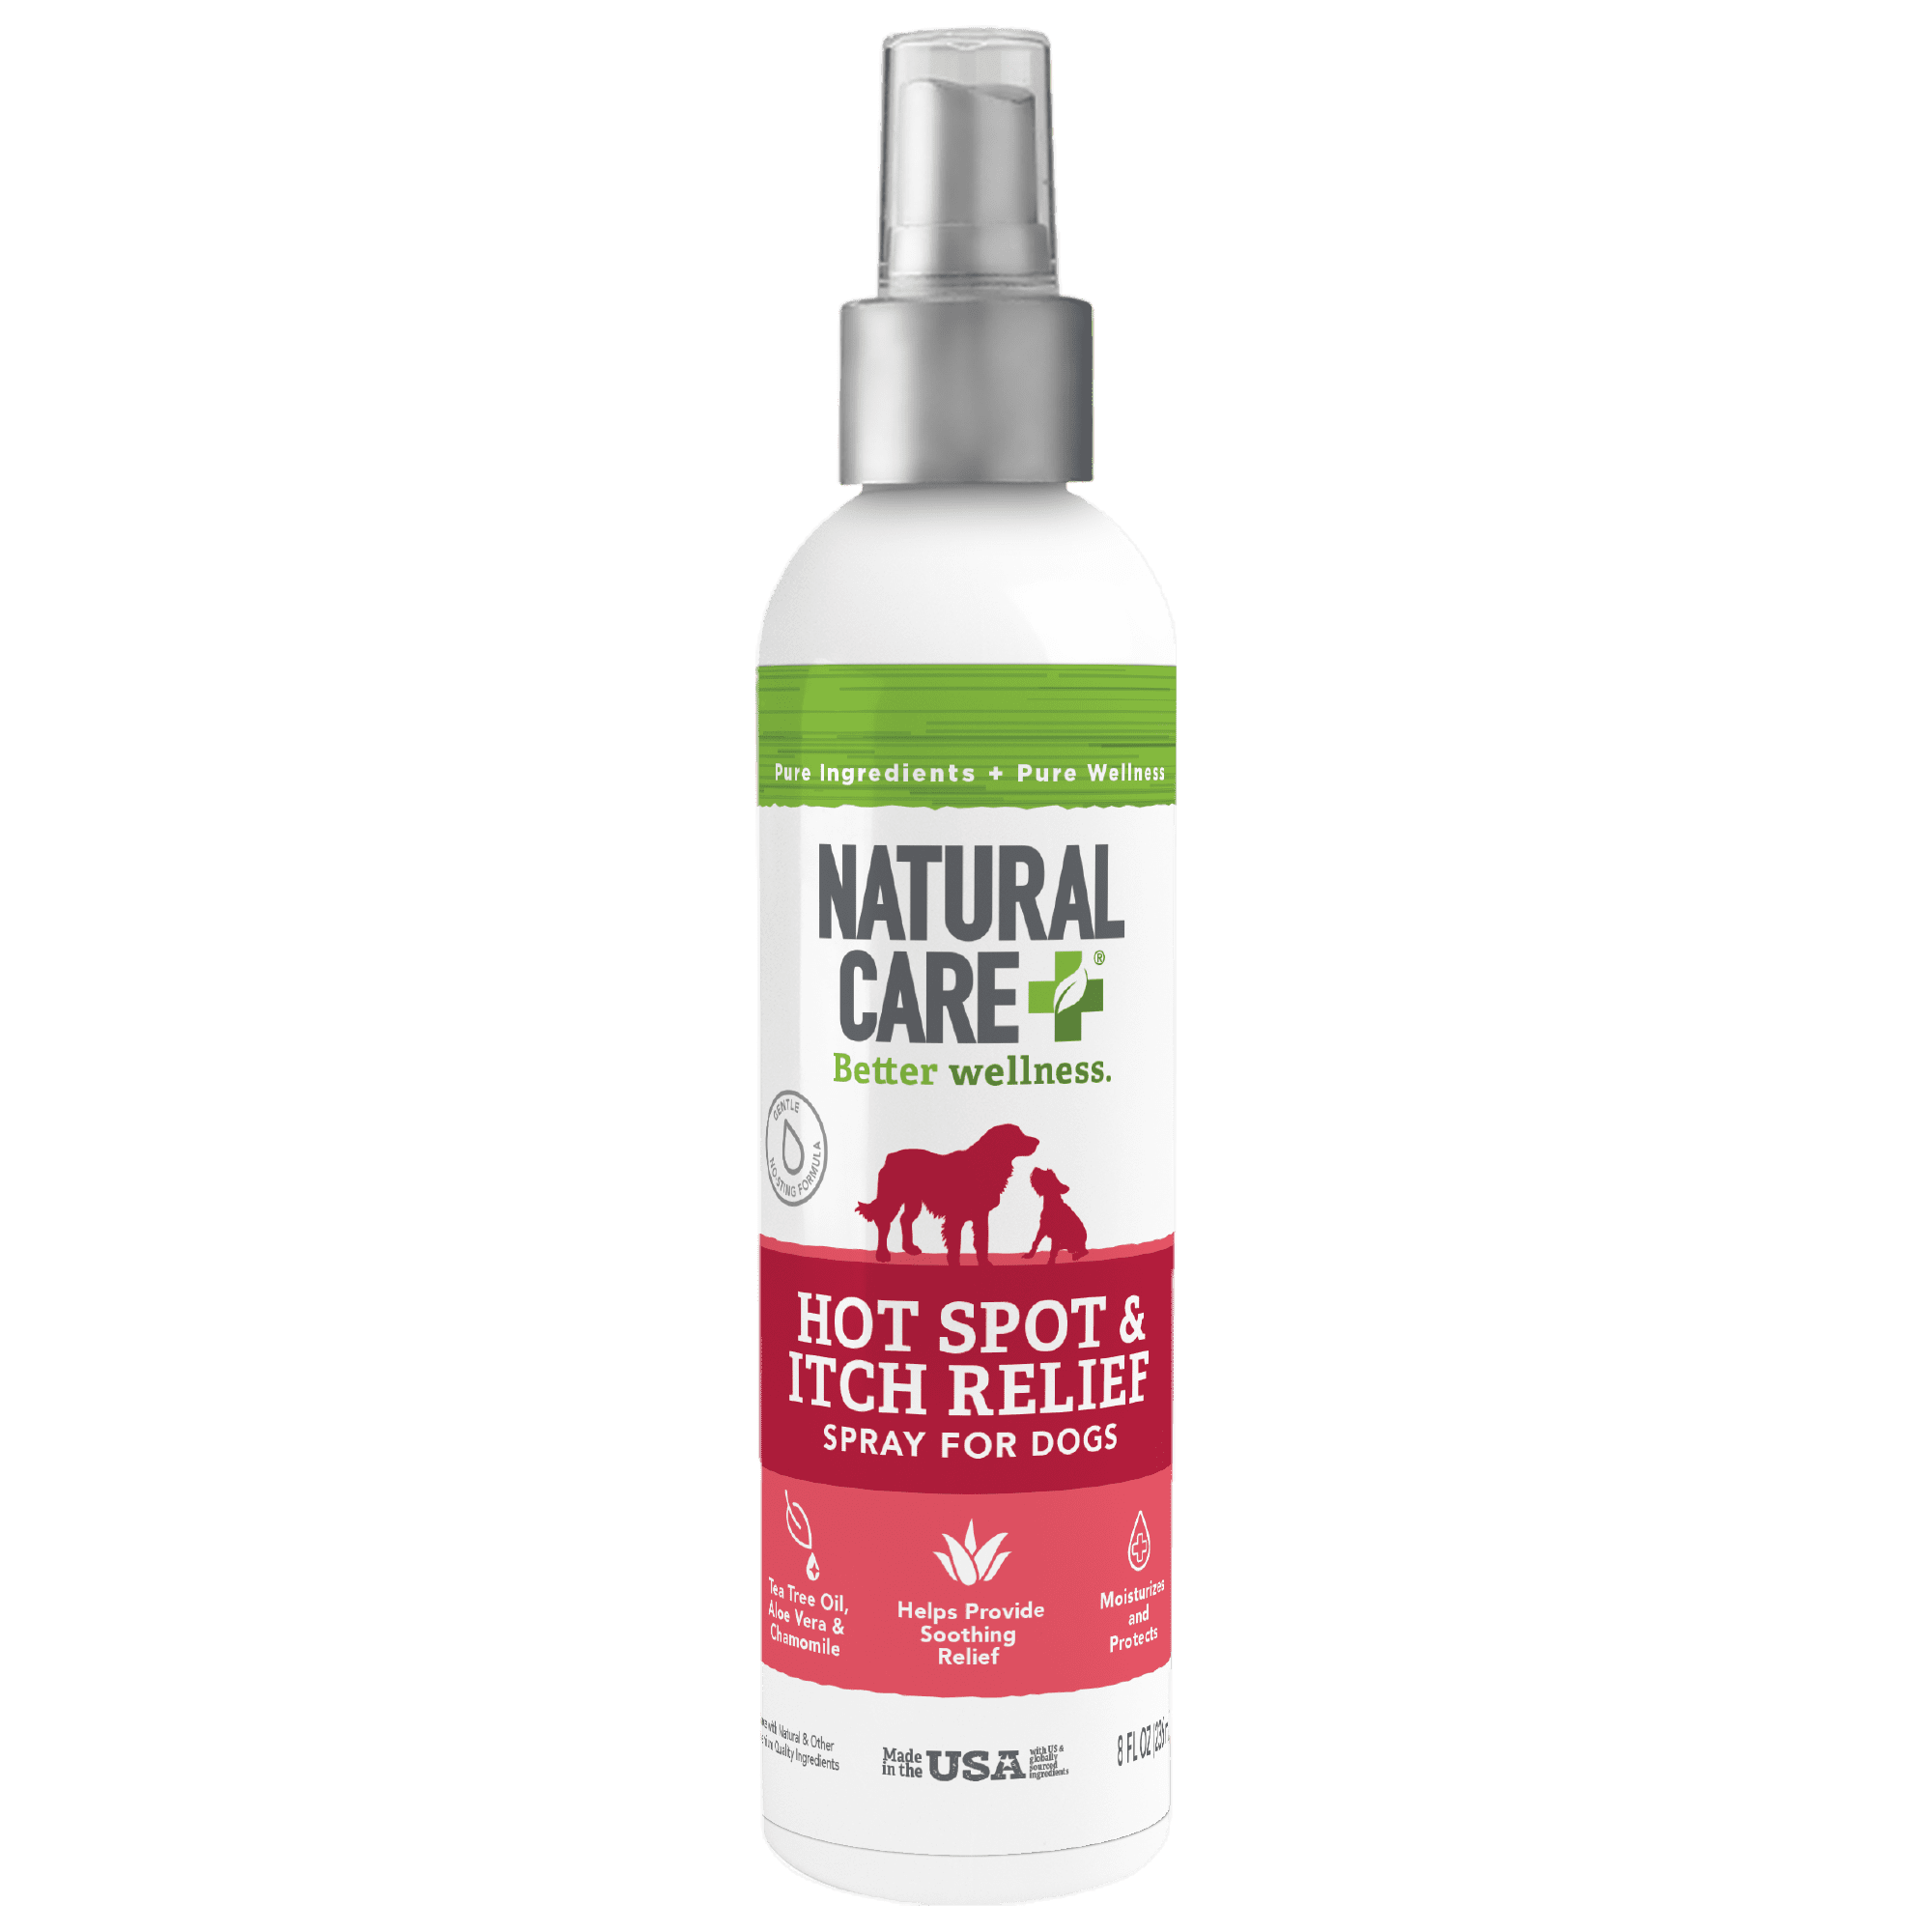 Natural Care Hot Spot and Itch Relief Spray for Dogs, 8 Ounces